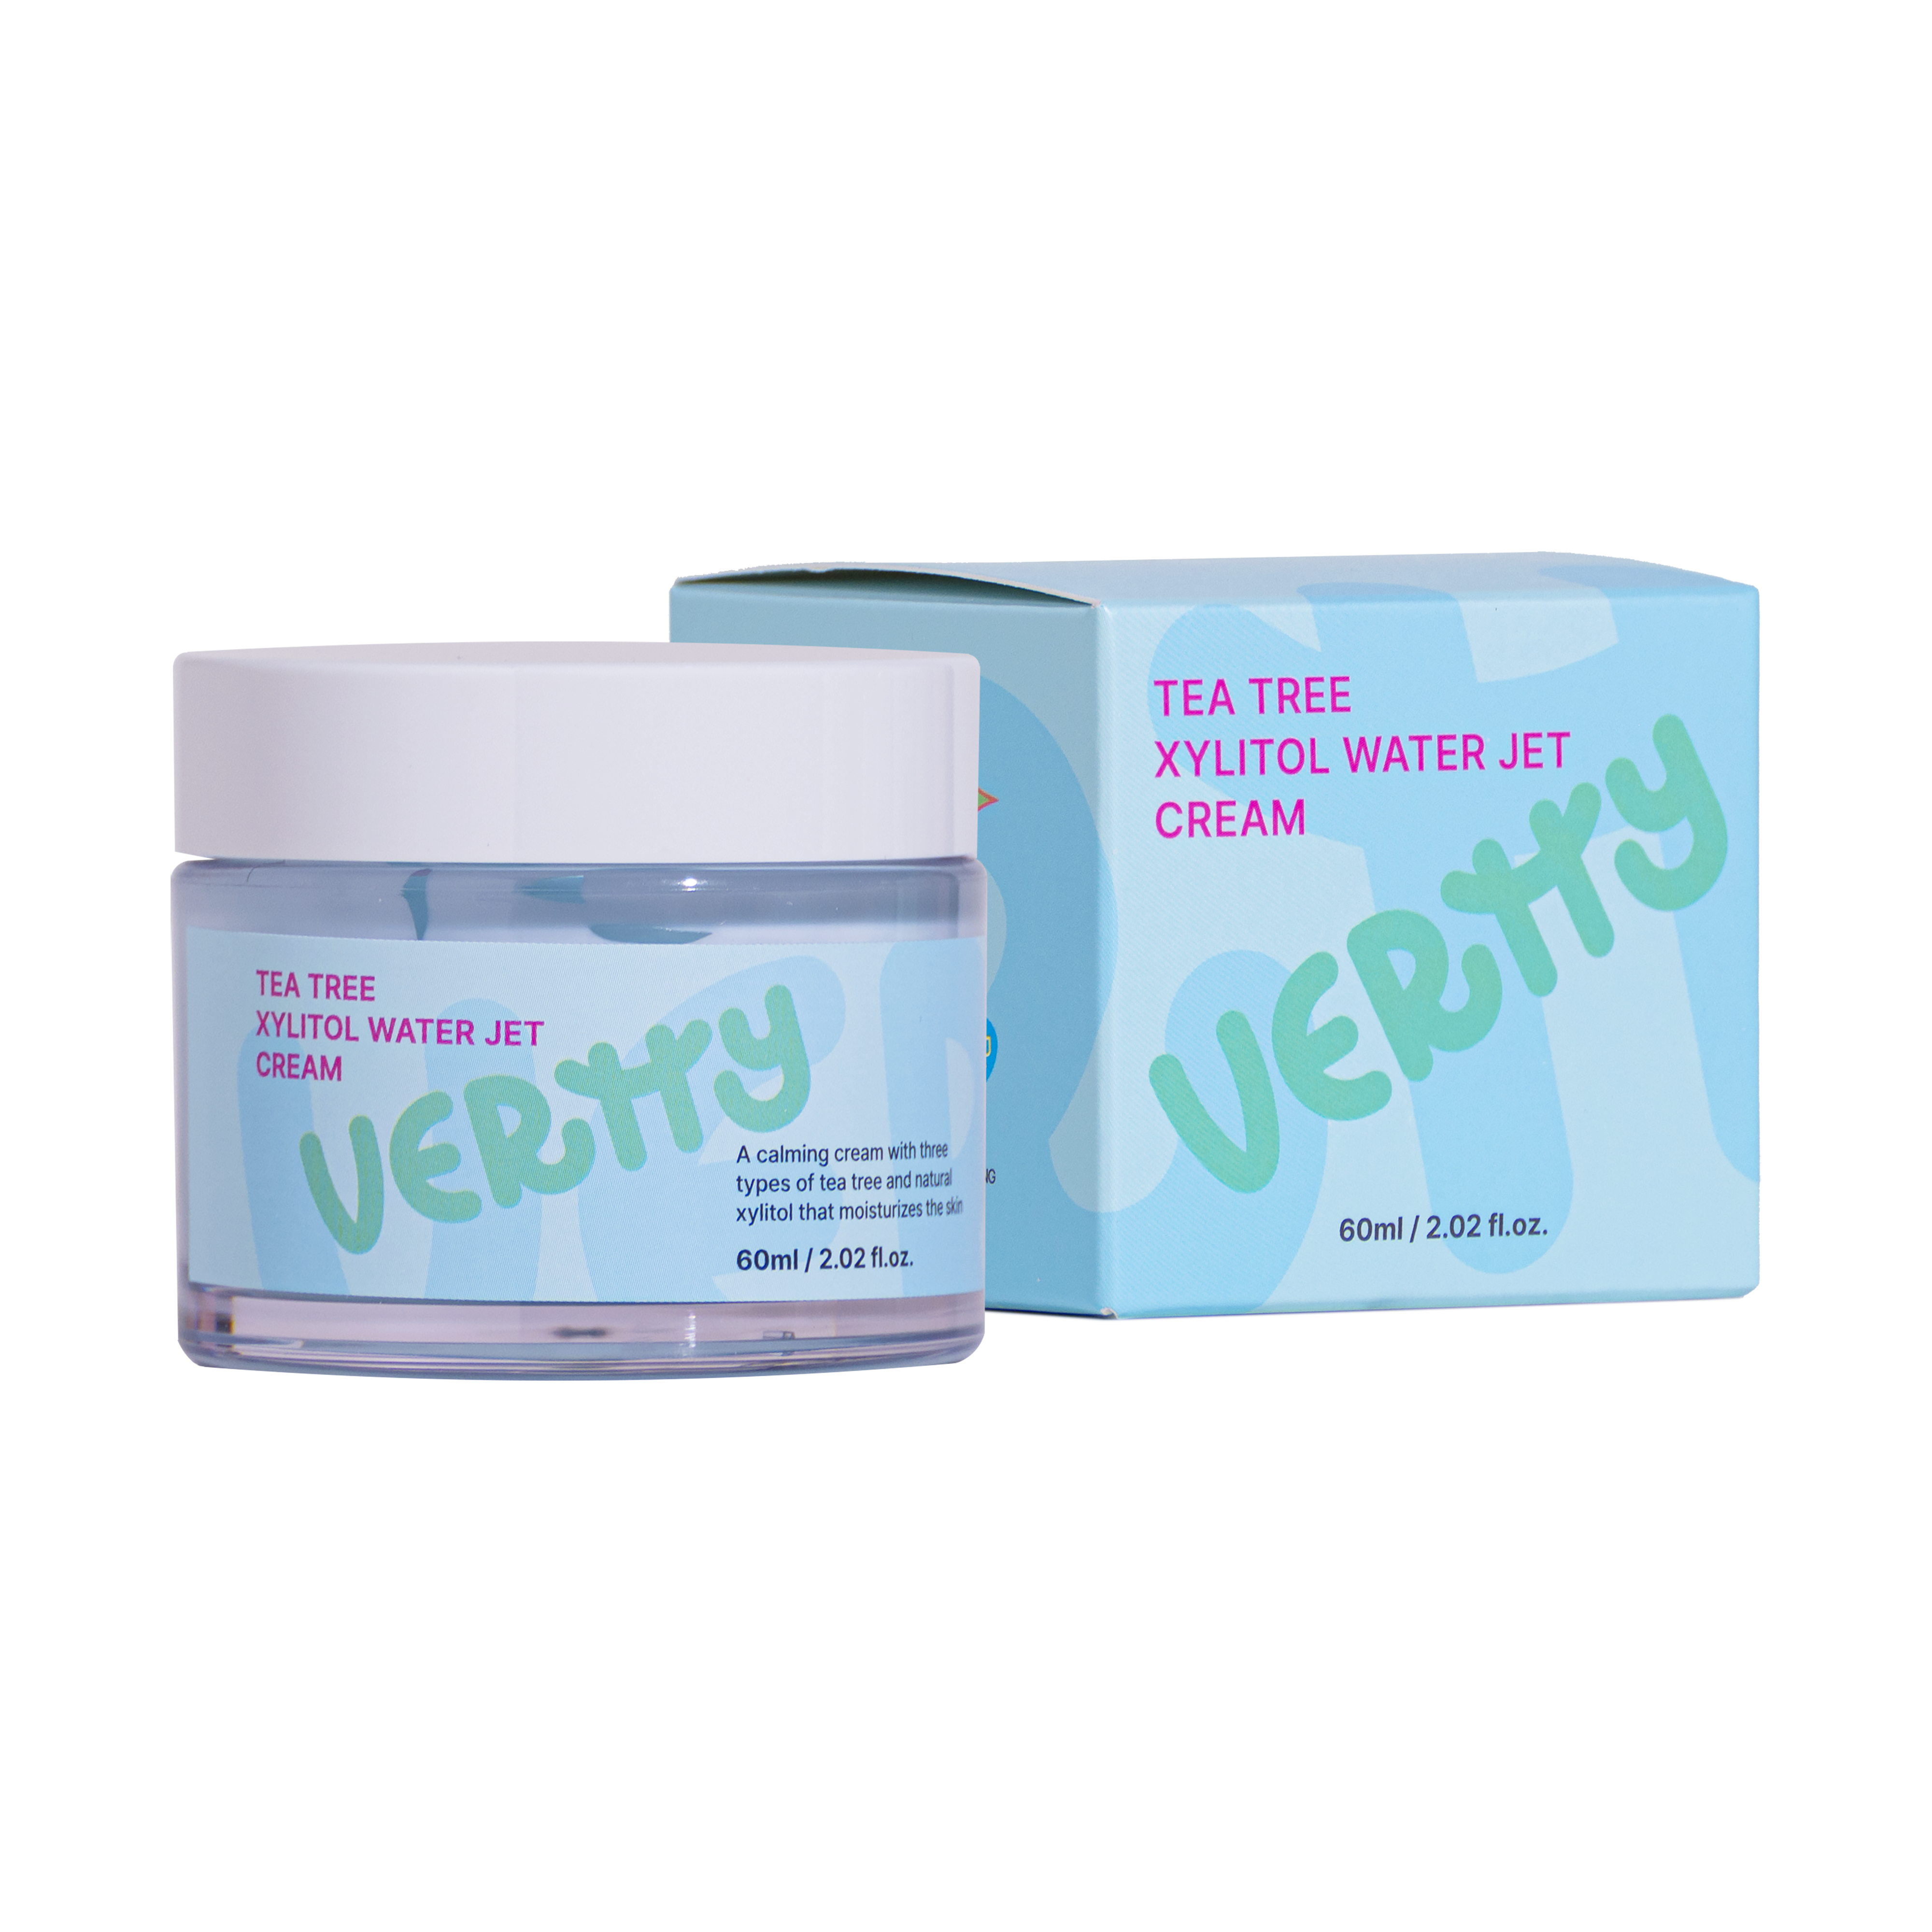 VERTTY TEE TREE Xylitol Water Jet Cream 60ml / 2.02 fl.oz. | A calming cream with three types of tea tree and natural xylitol that moisturizes the skin